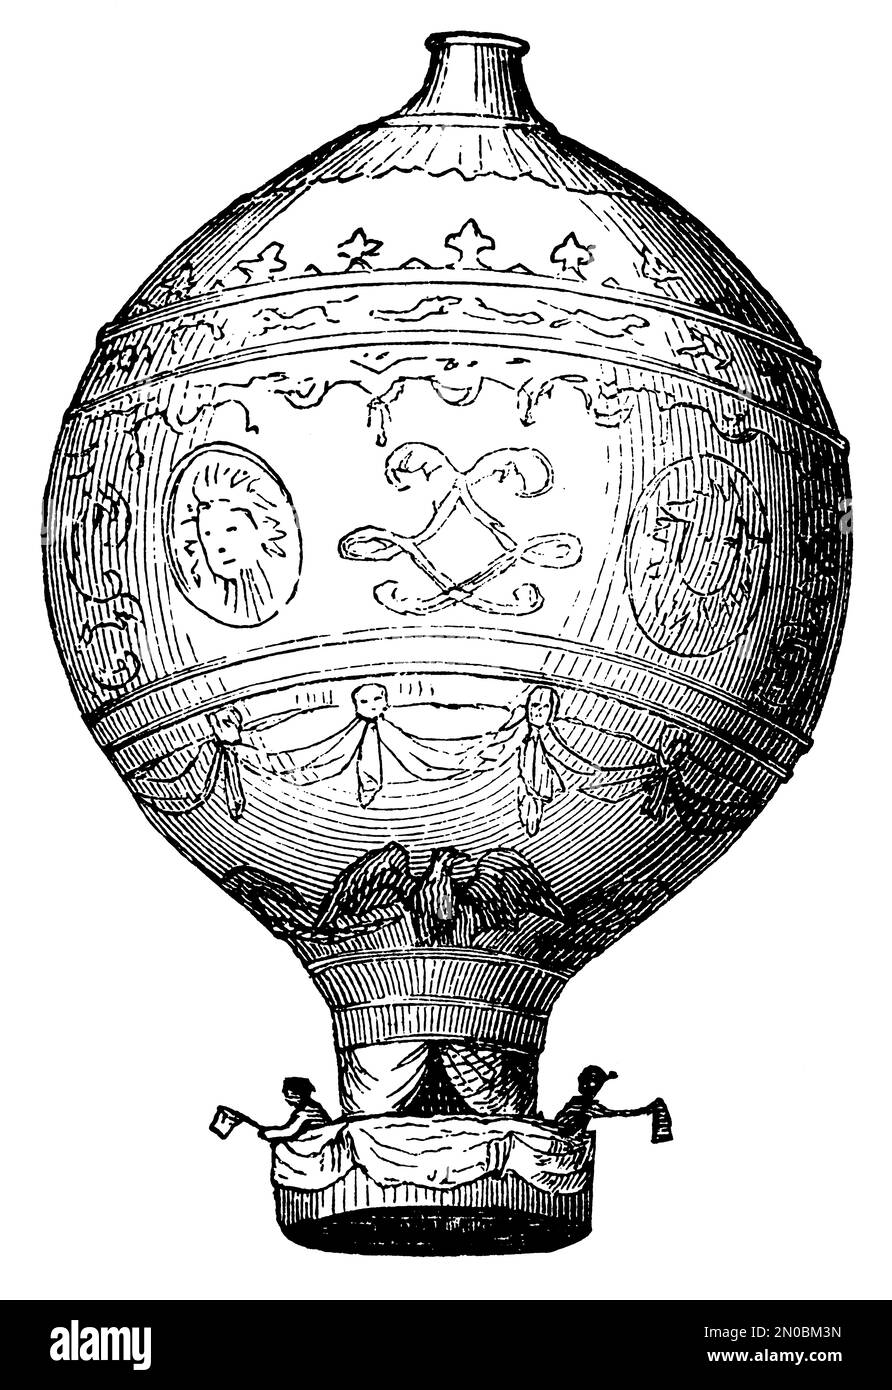 Vintage illustration of Montgolfier brothers' hot air balloon (isolated on white). Published in Systematischer Bilder-Atlas zum Conversations-Lexikon, Stock Photo